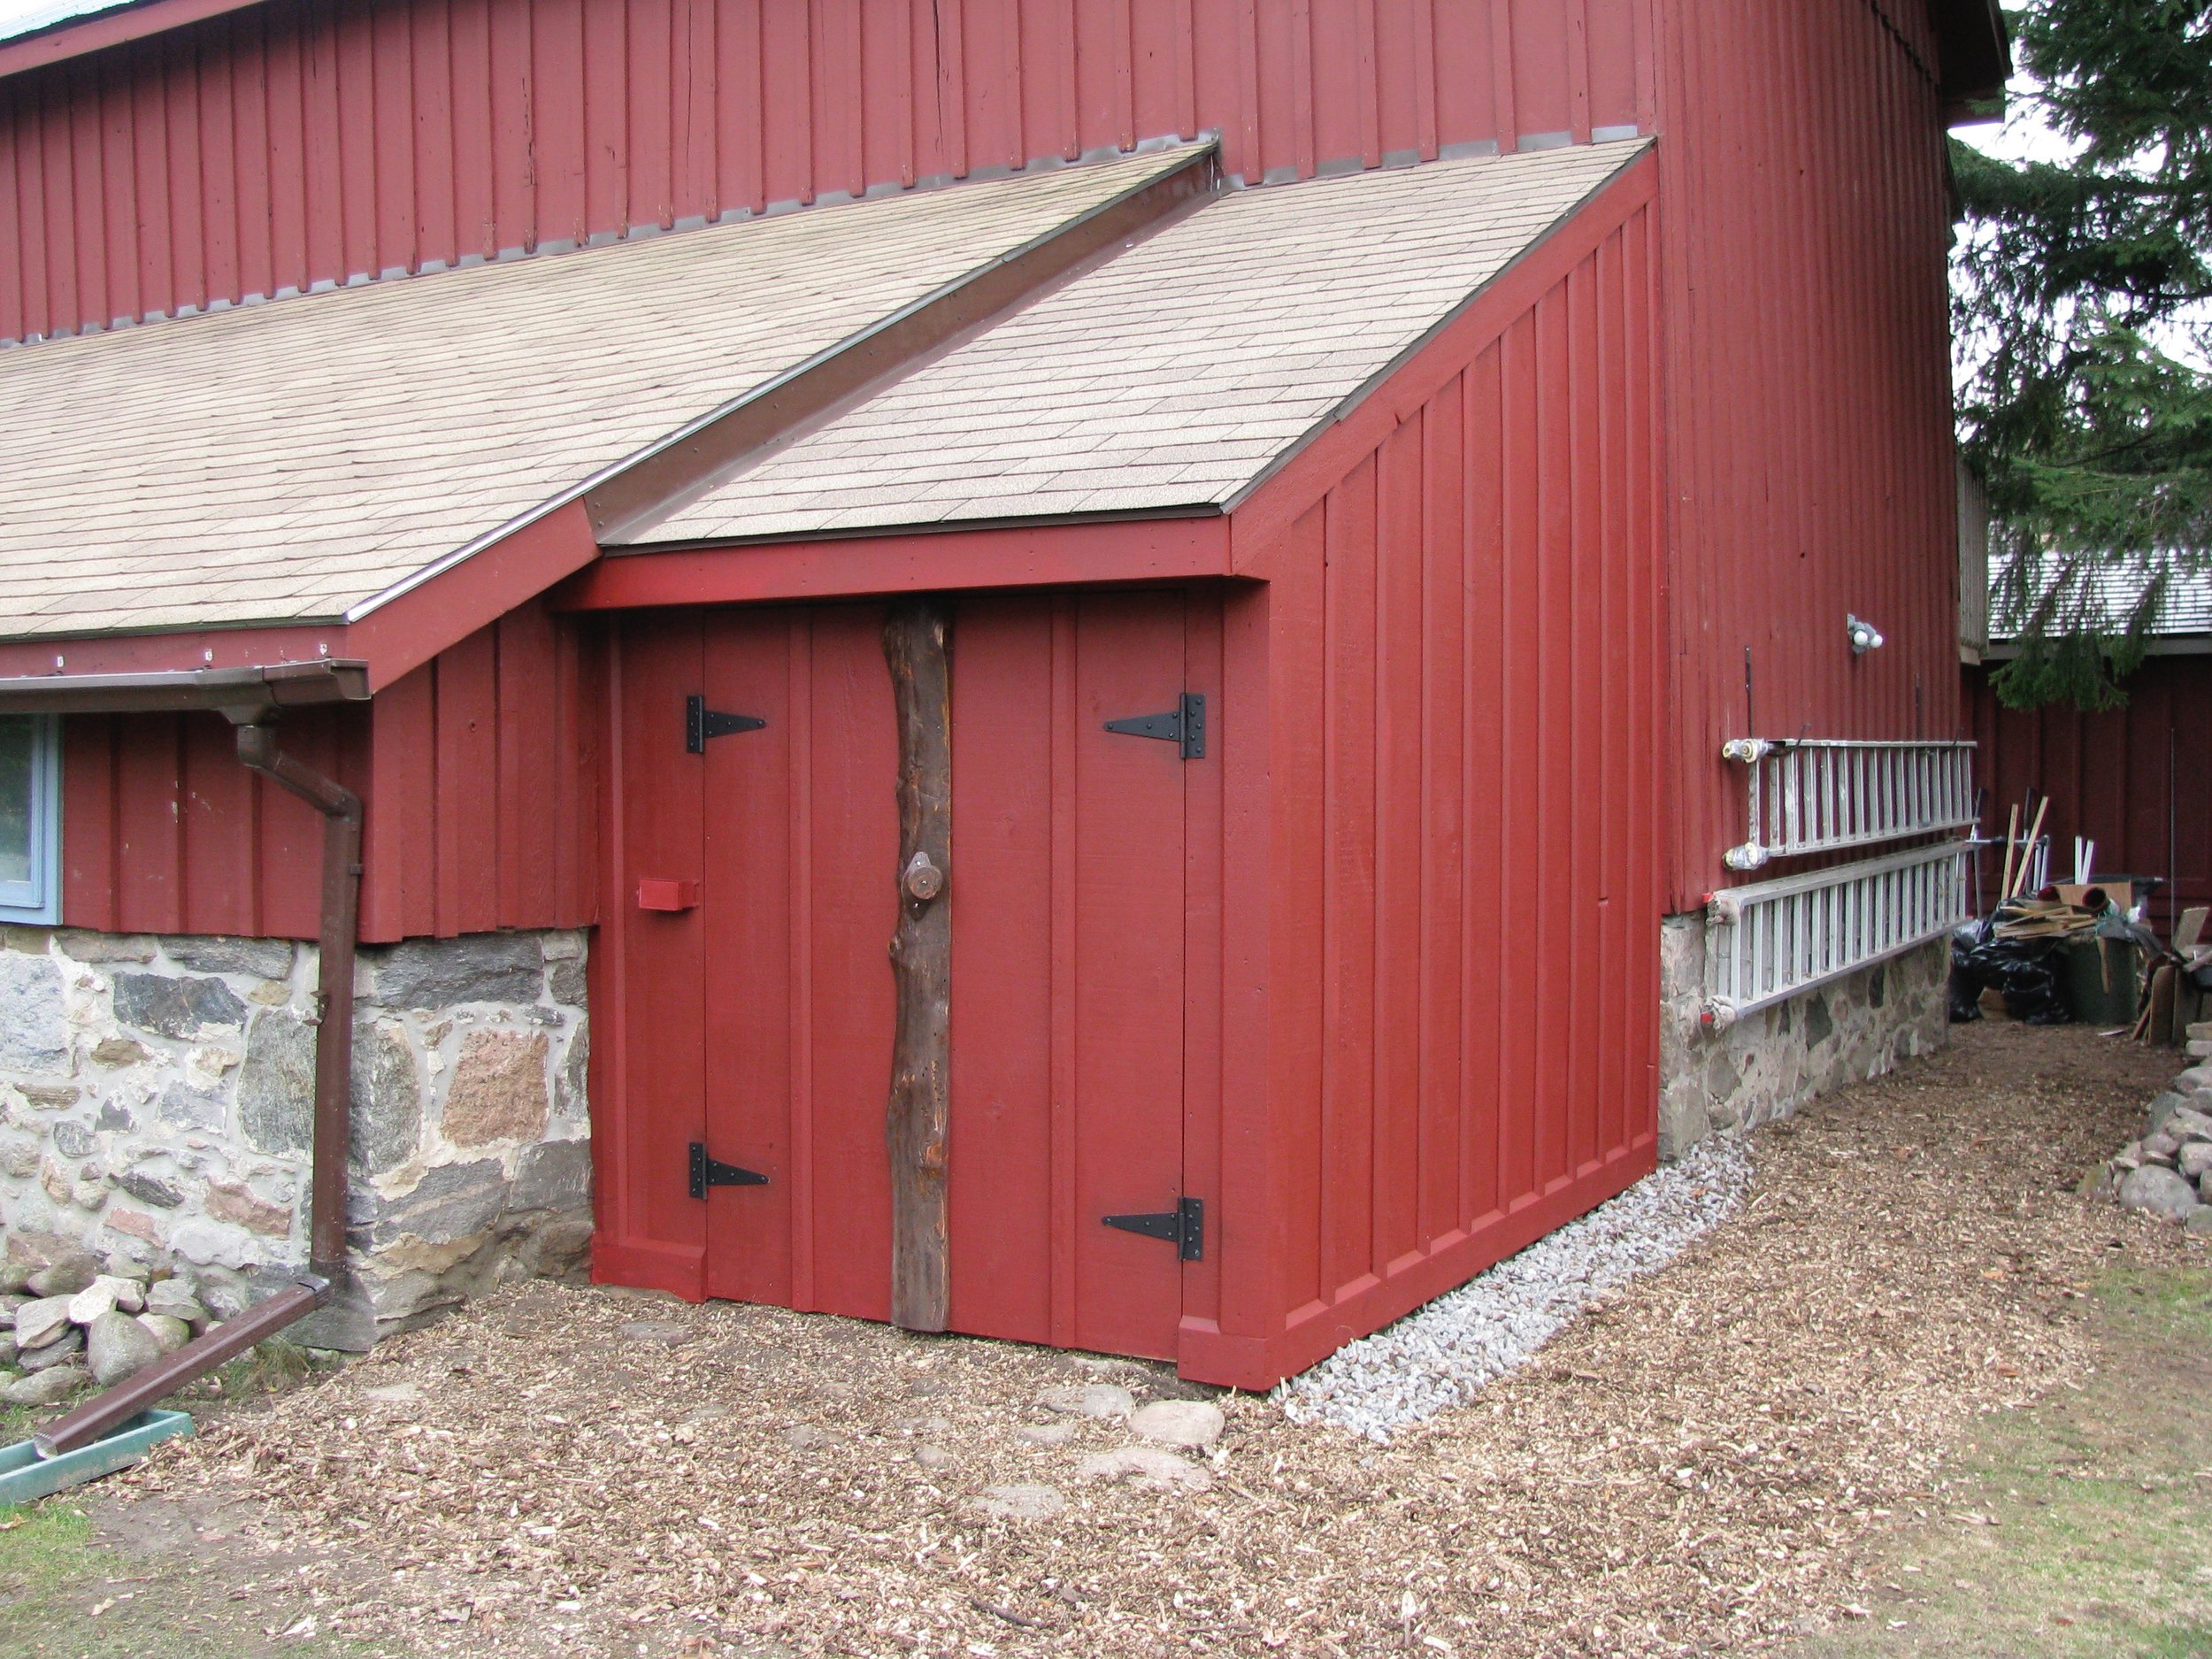 MOUNT ALBERT HISTORICAL DRIVE SHED ADDITION.jpg